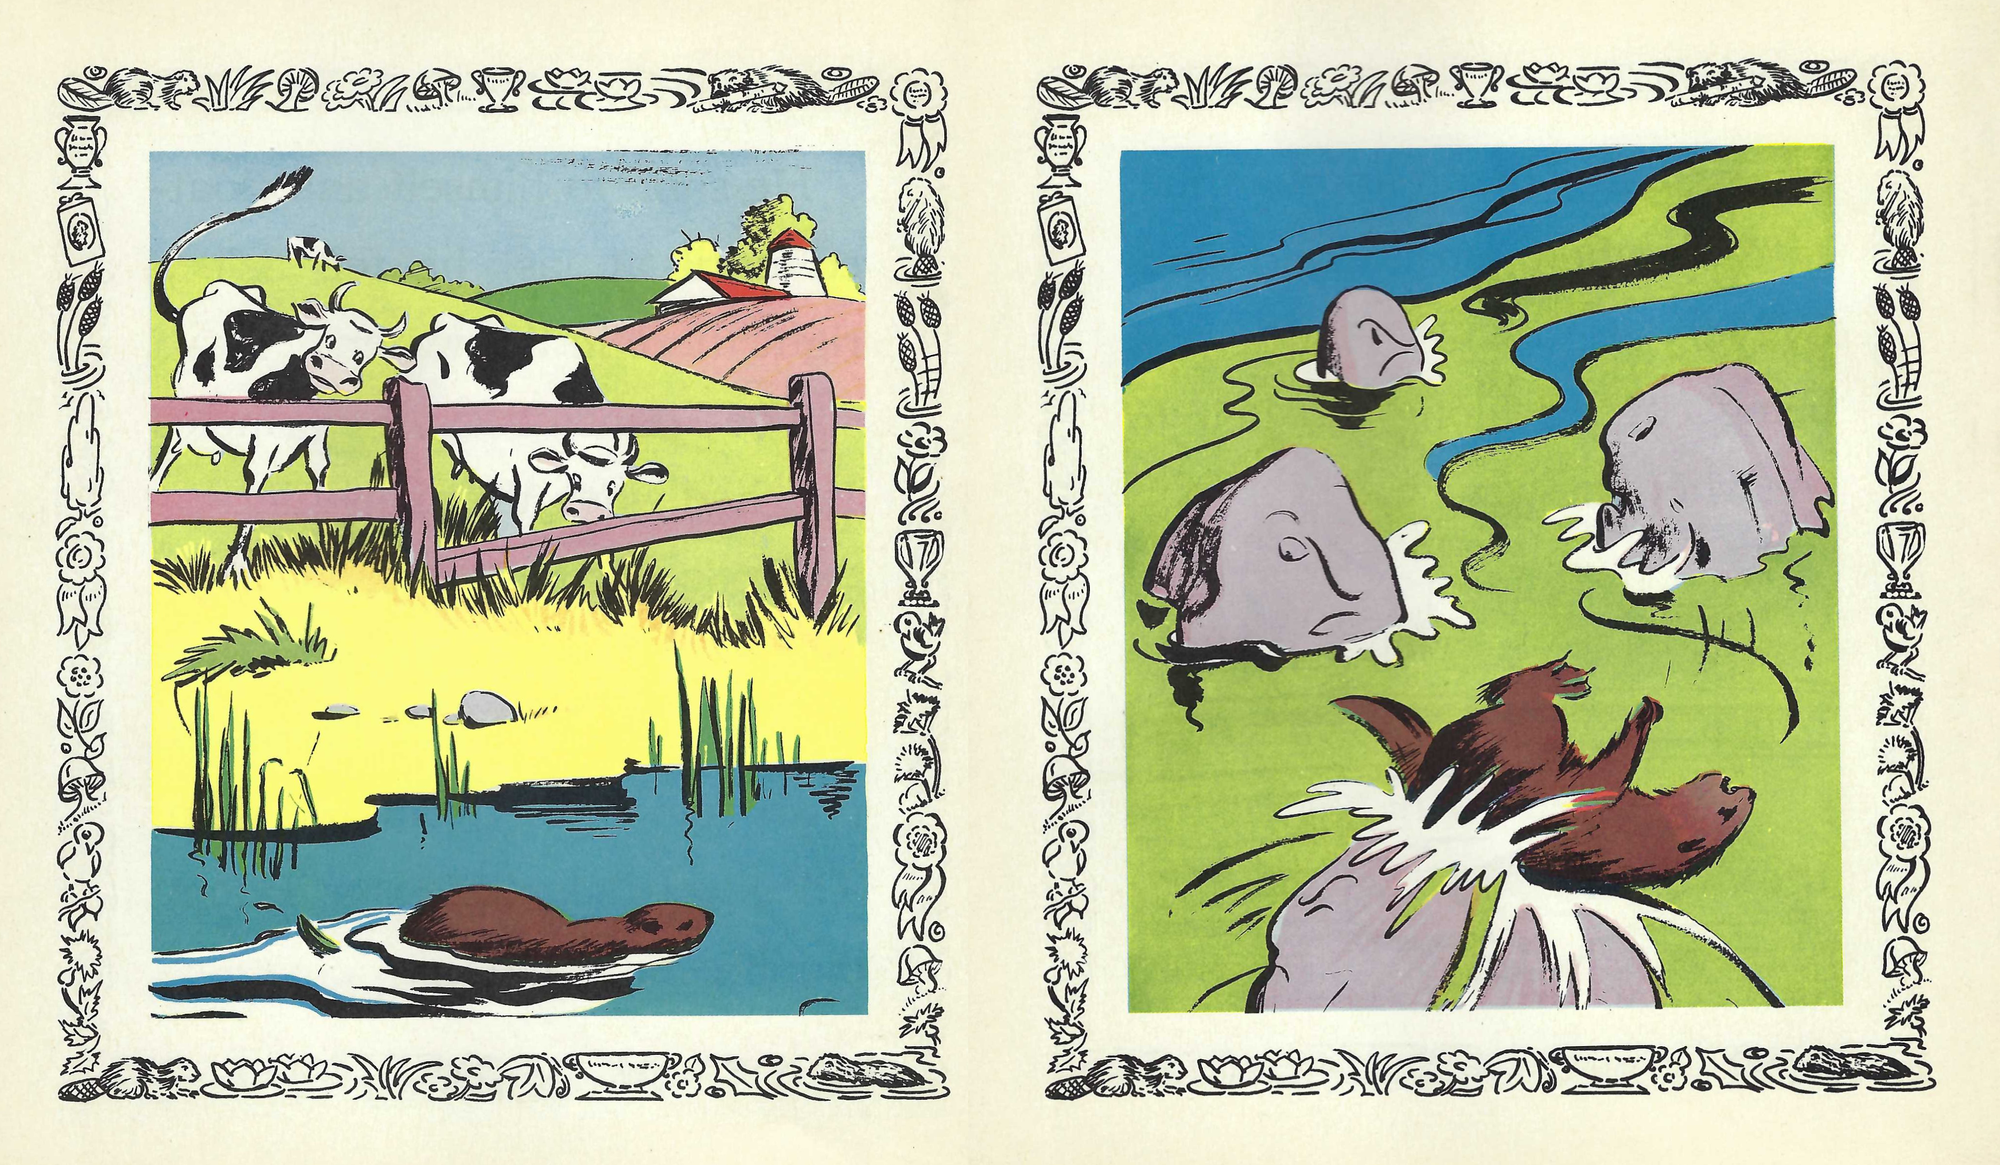 (left) Beaver swimming in river with 2 cows looking at him from behind fence in meadow; (right) beaver upended between rocks in rapids)